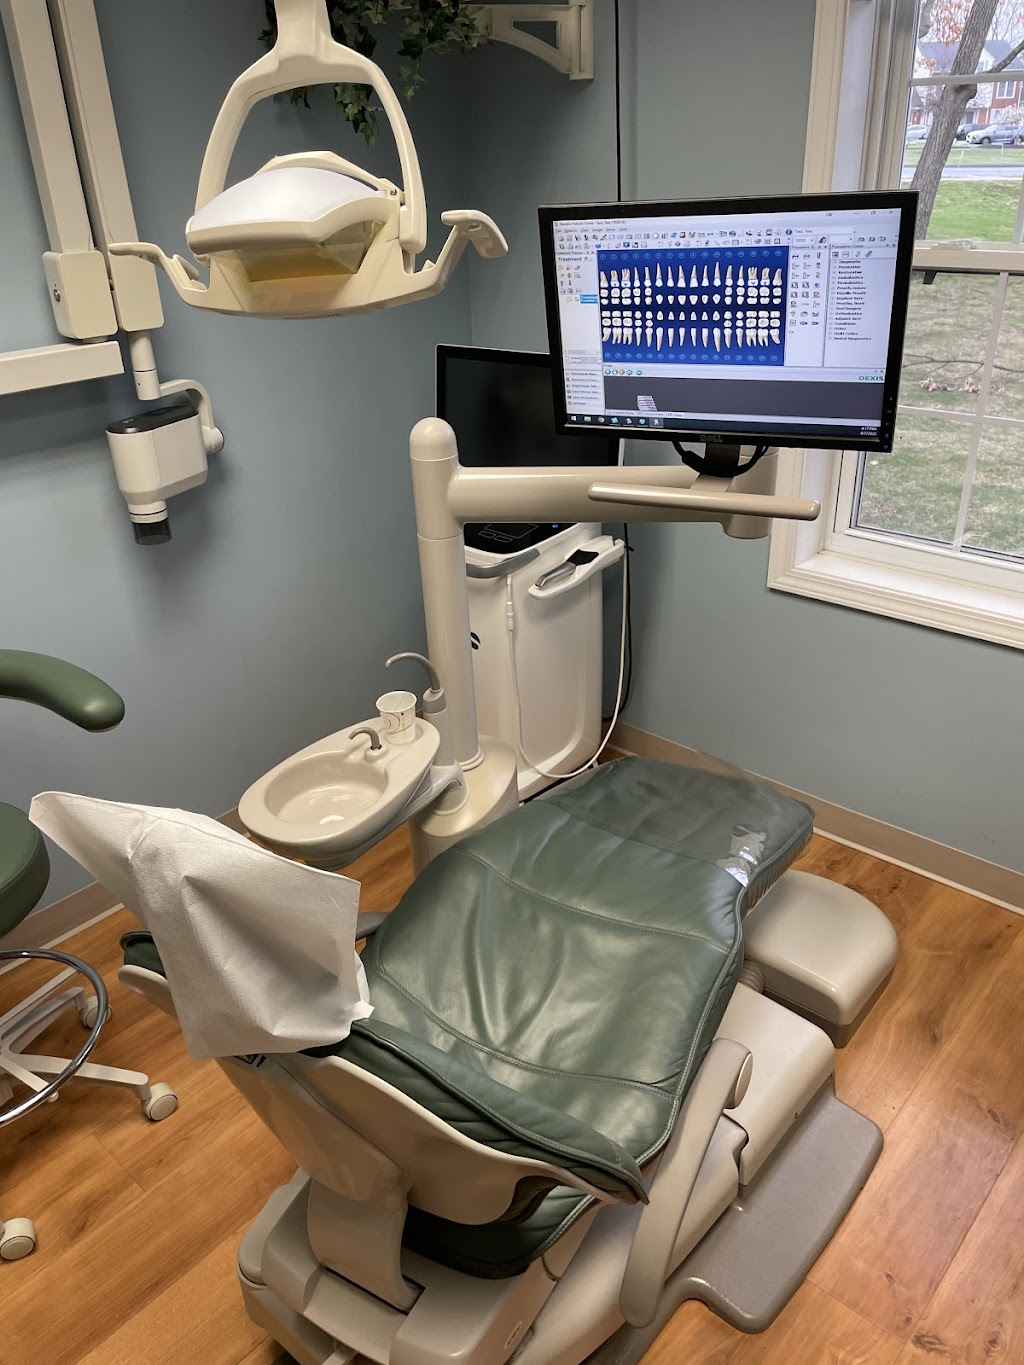 All Smiles of Connecticut | 2 Concorde Way Building #1, Windsor Locks, CT 06096 | Phone: (860) 623-3244